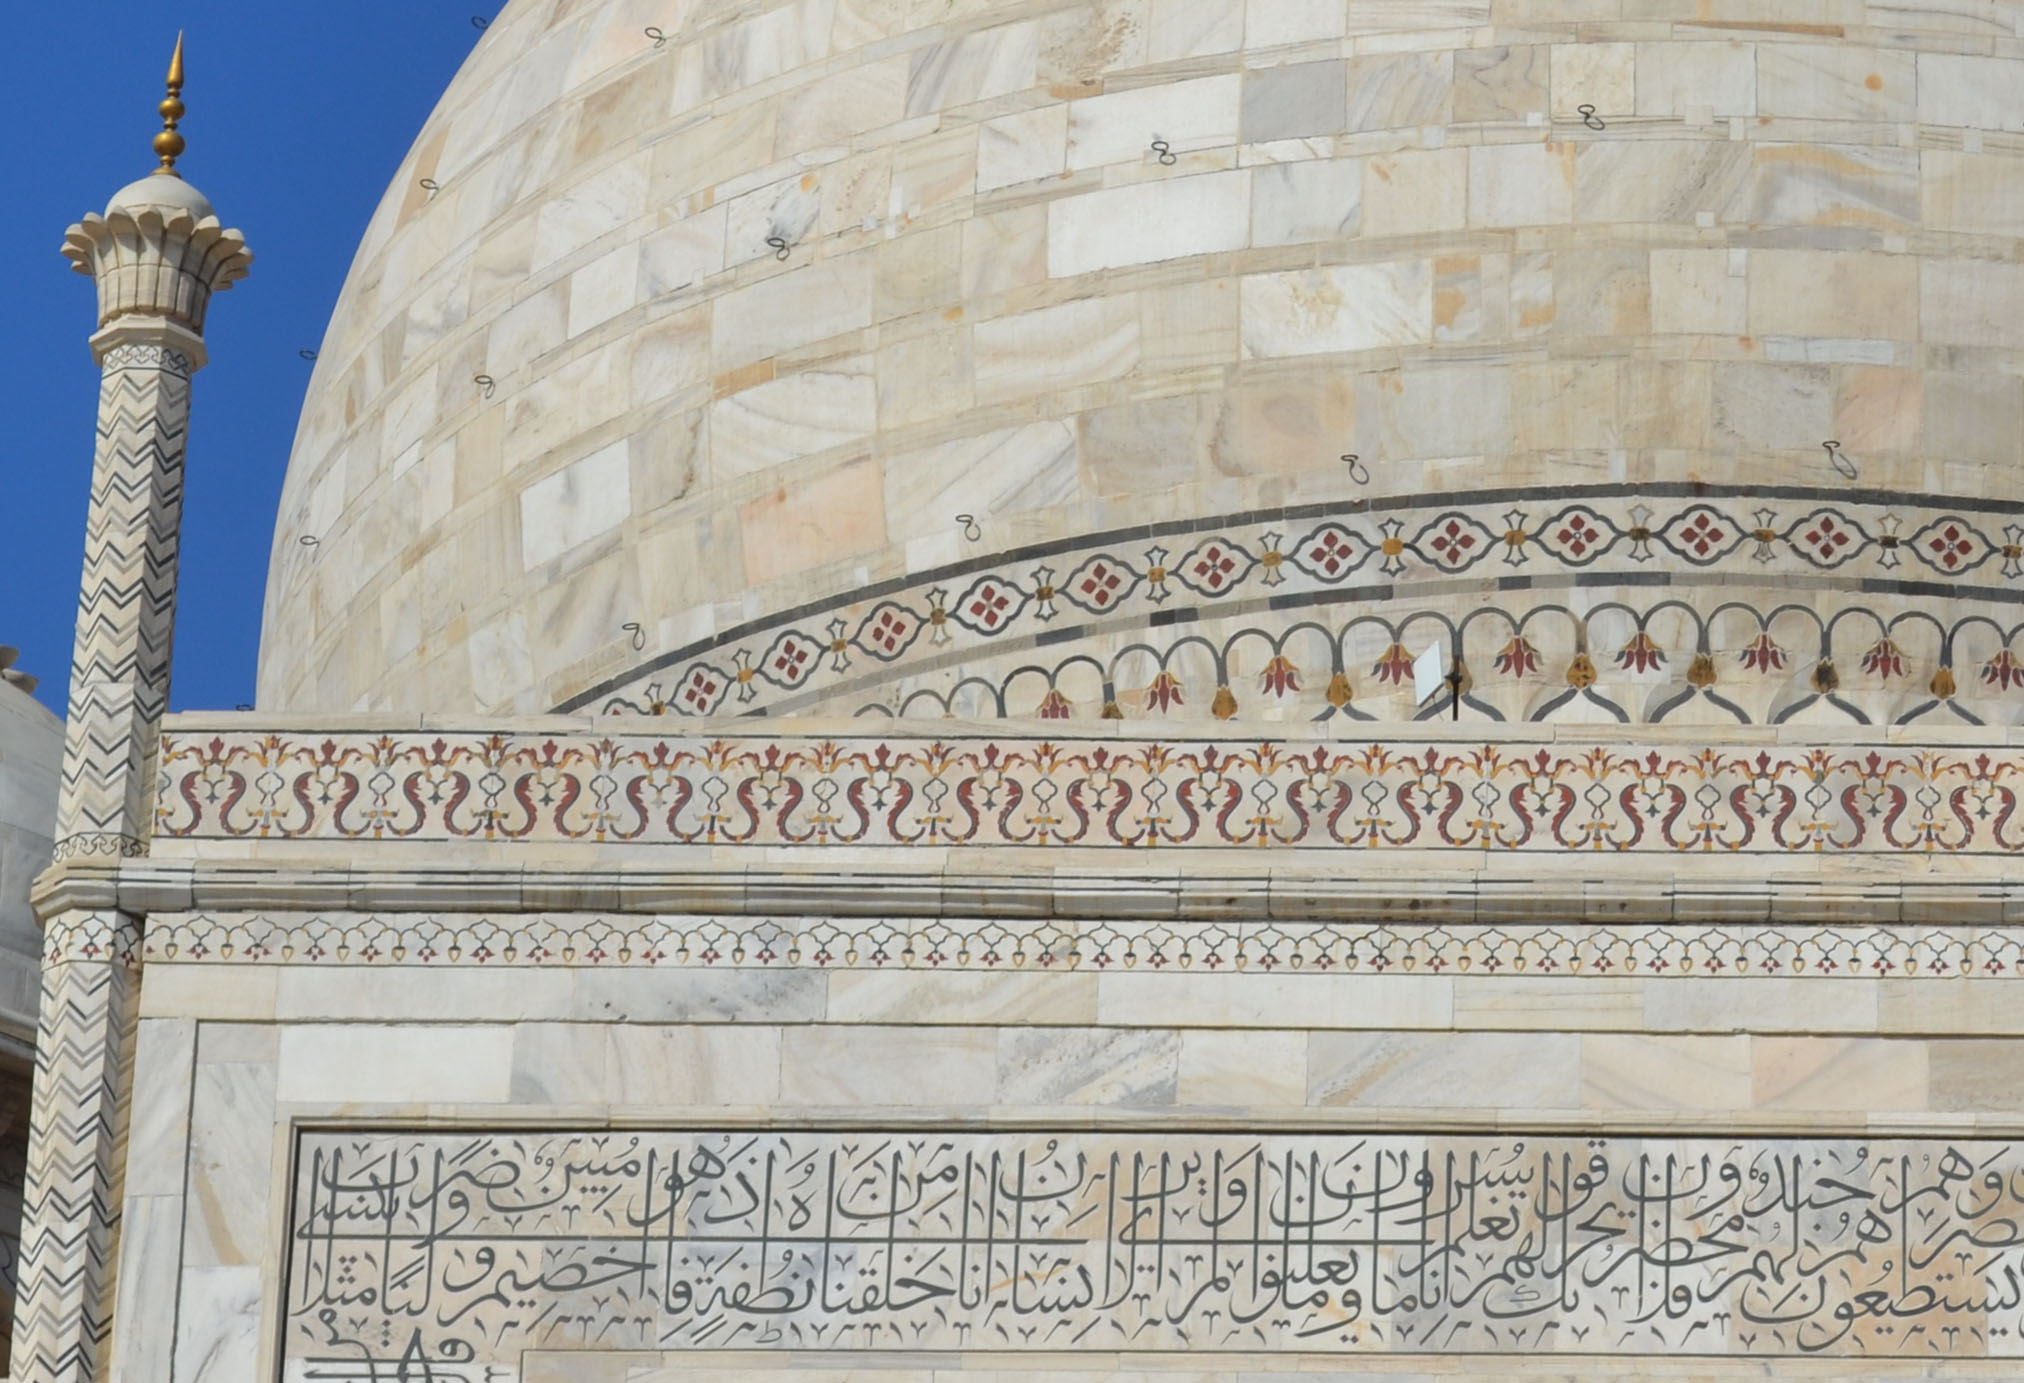 File:A close up view of the Taj Mahal's dome and the platform ...